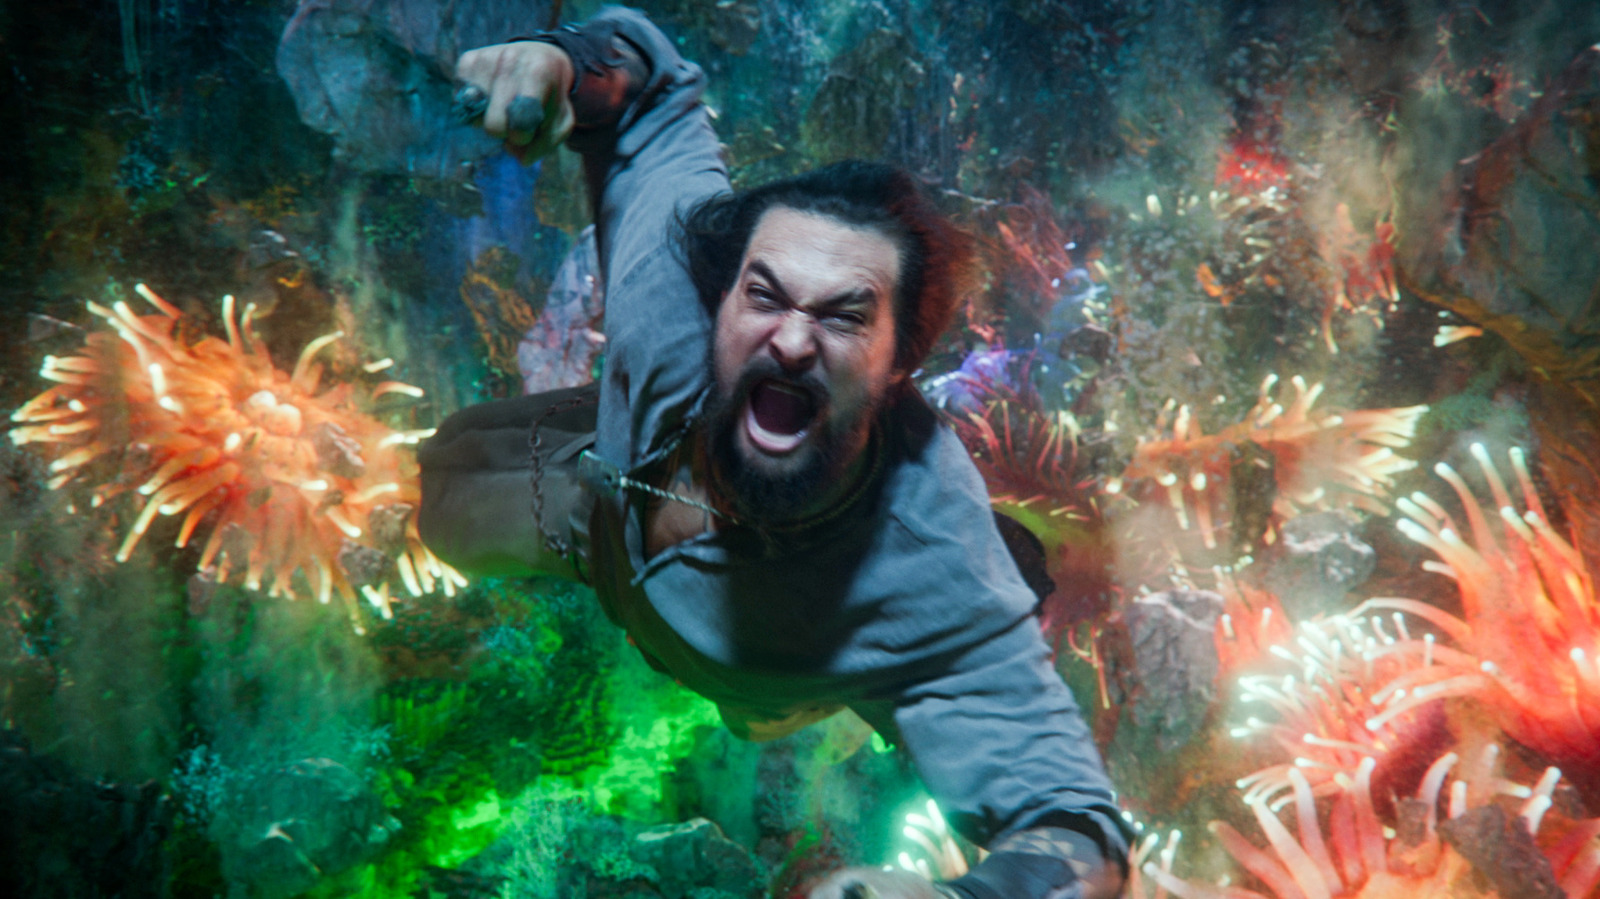 Aquaman And The Lost Kingdom Belly-Flops At The Box Office With $43 Million Debut